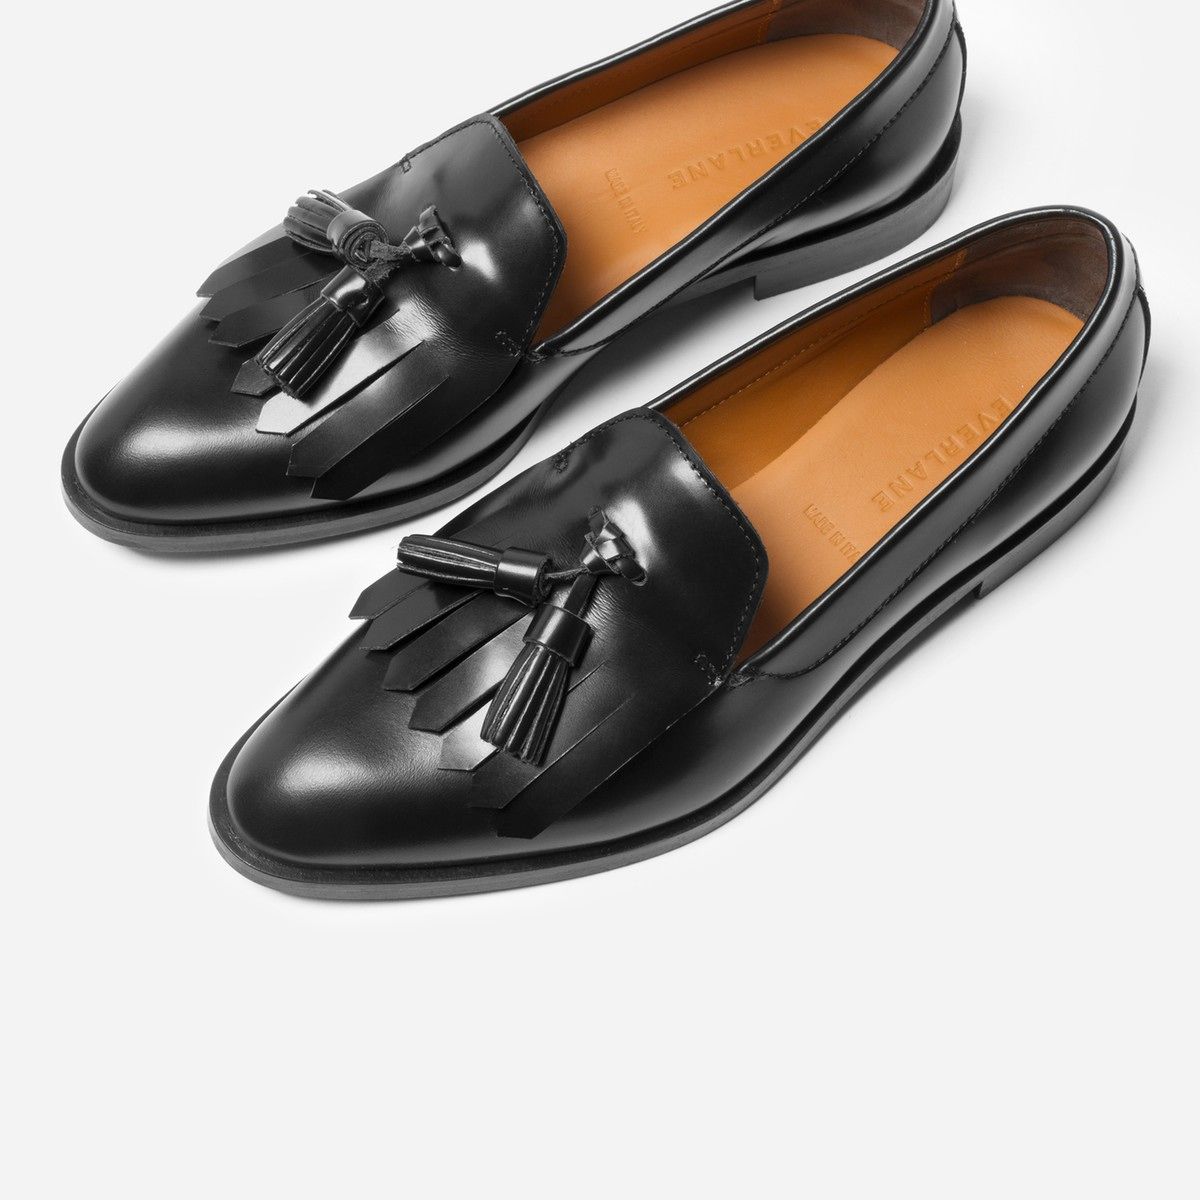 Tassel Loafers: Adding Sophistication and Style to Your Footwear